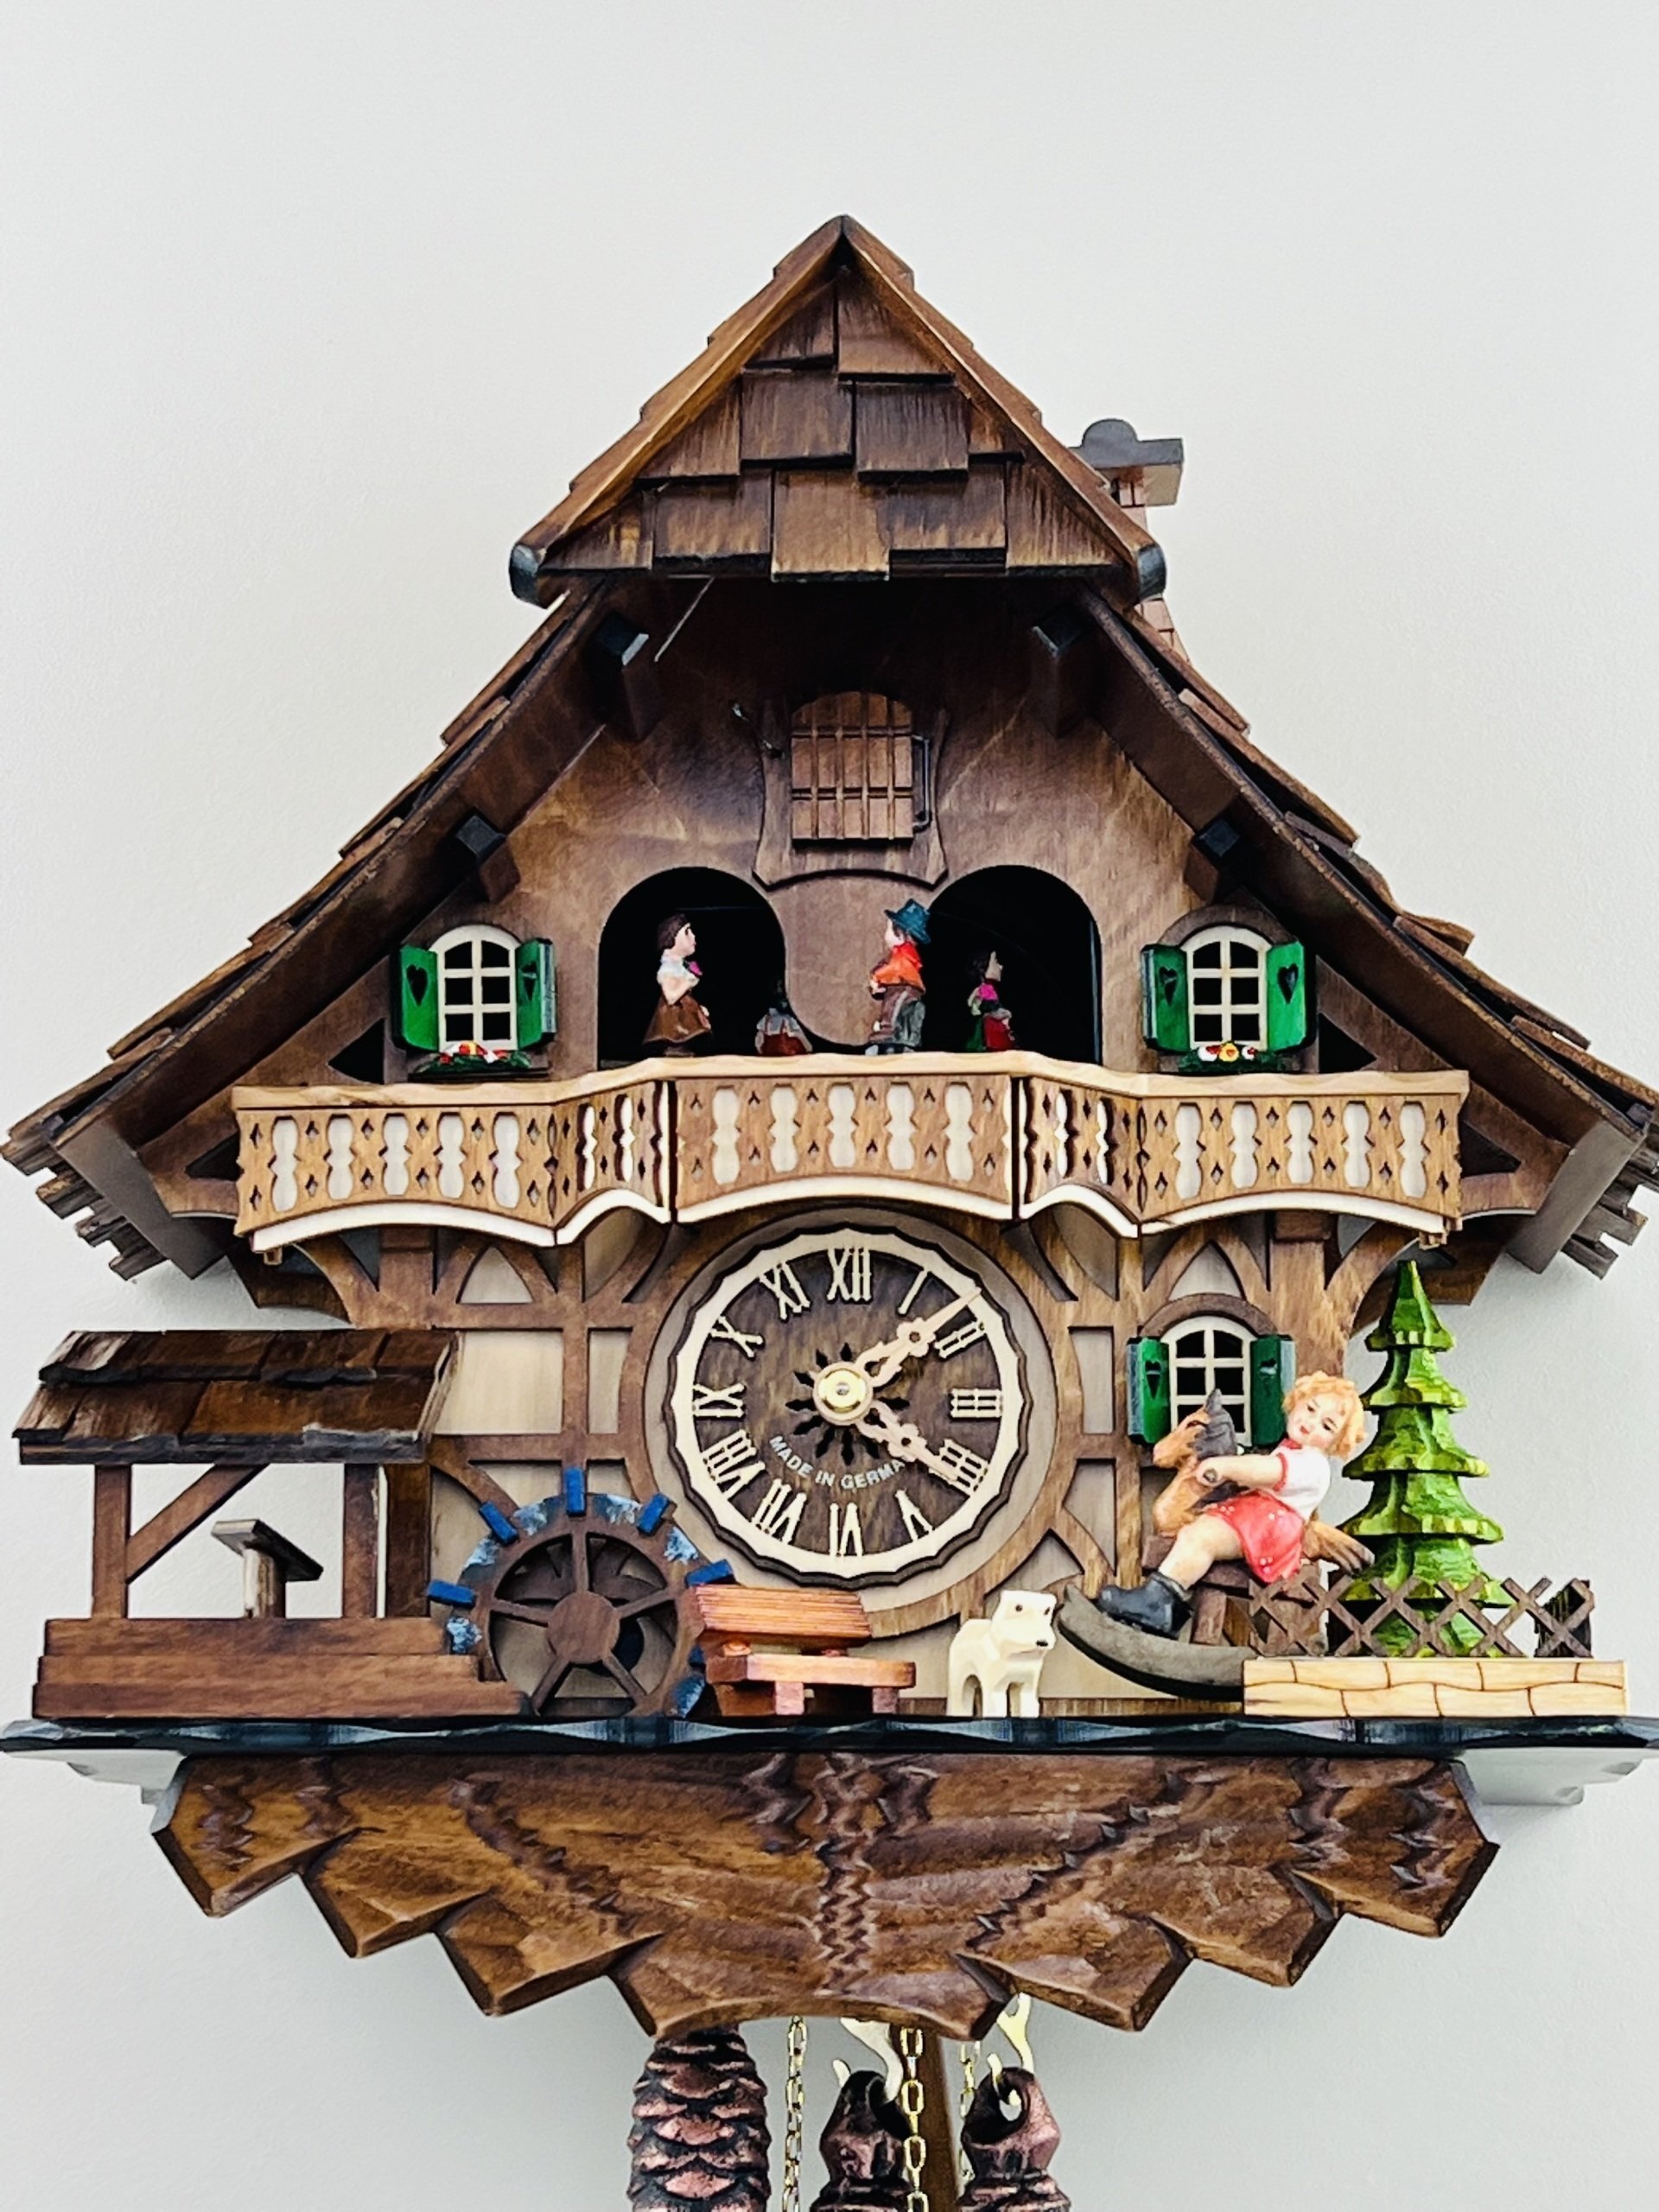 13" One Day Musical Black Forest Cuckoo Clock with Dancers, Waterwheel, and  Girl on Rocking Horse